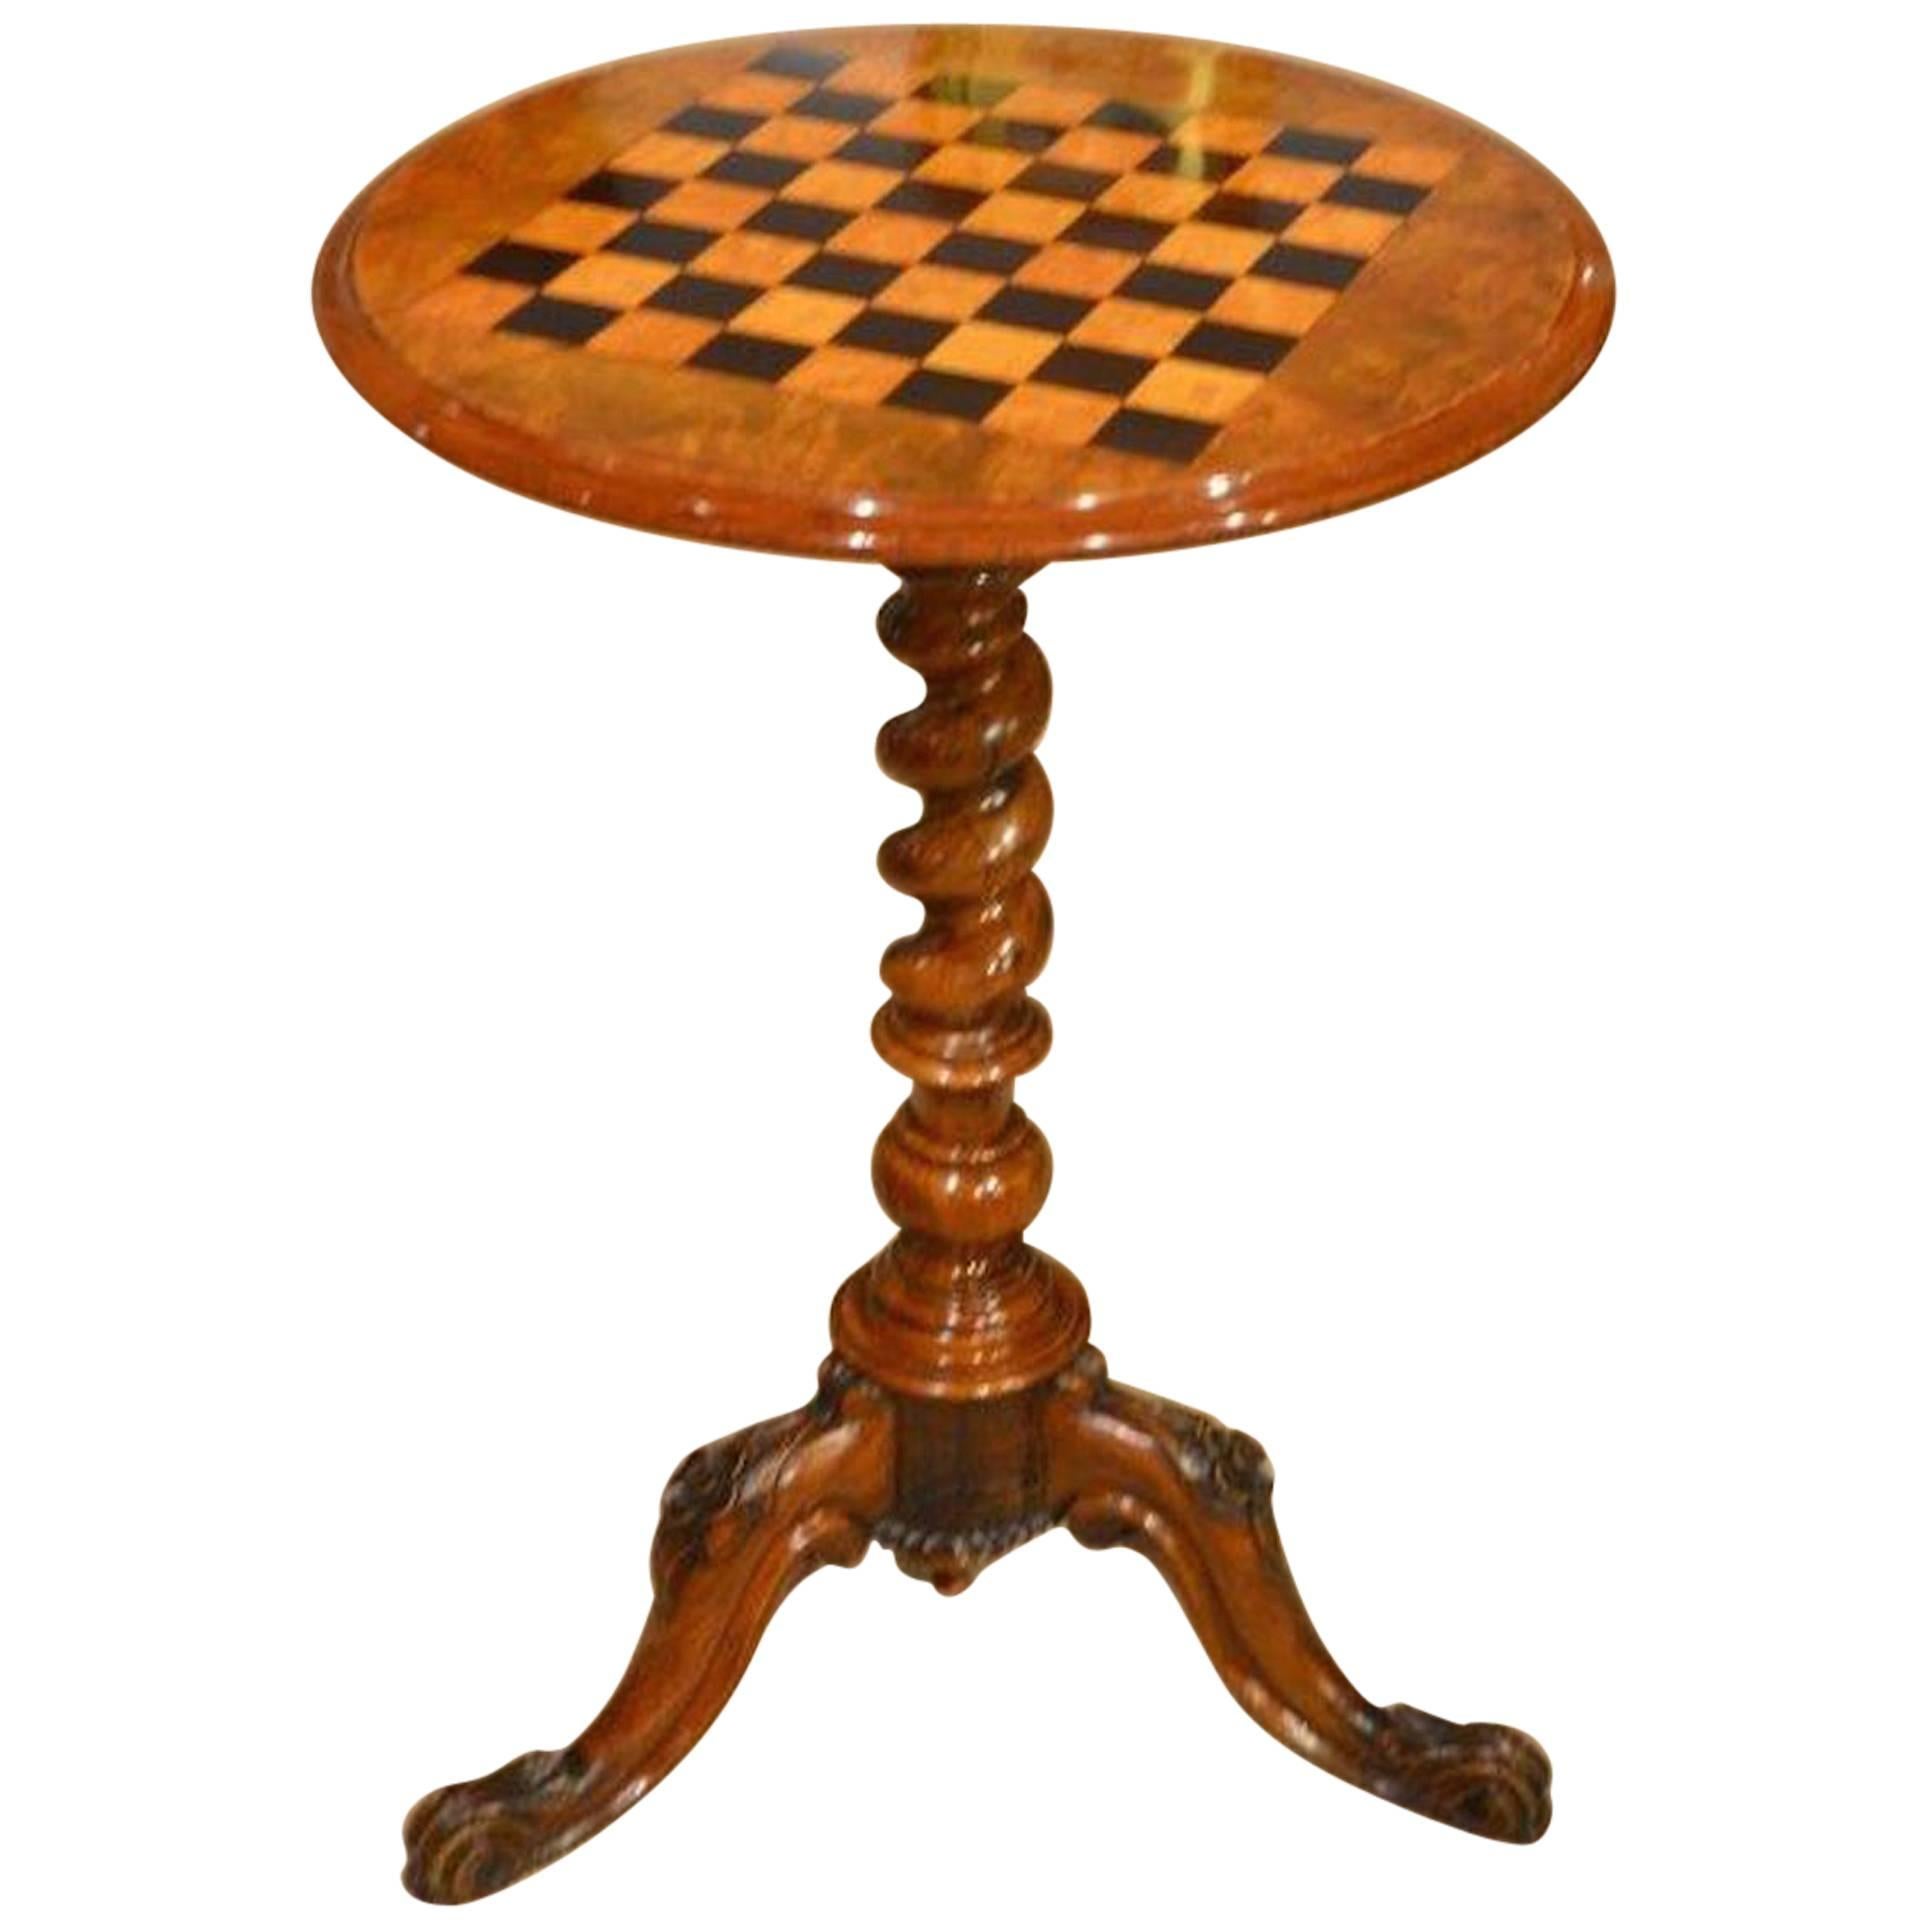 A Burr Walnut Victorian Period Antique Chess Table